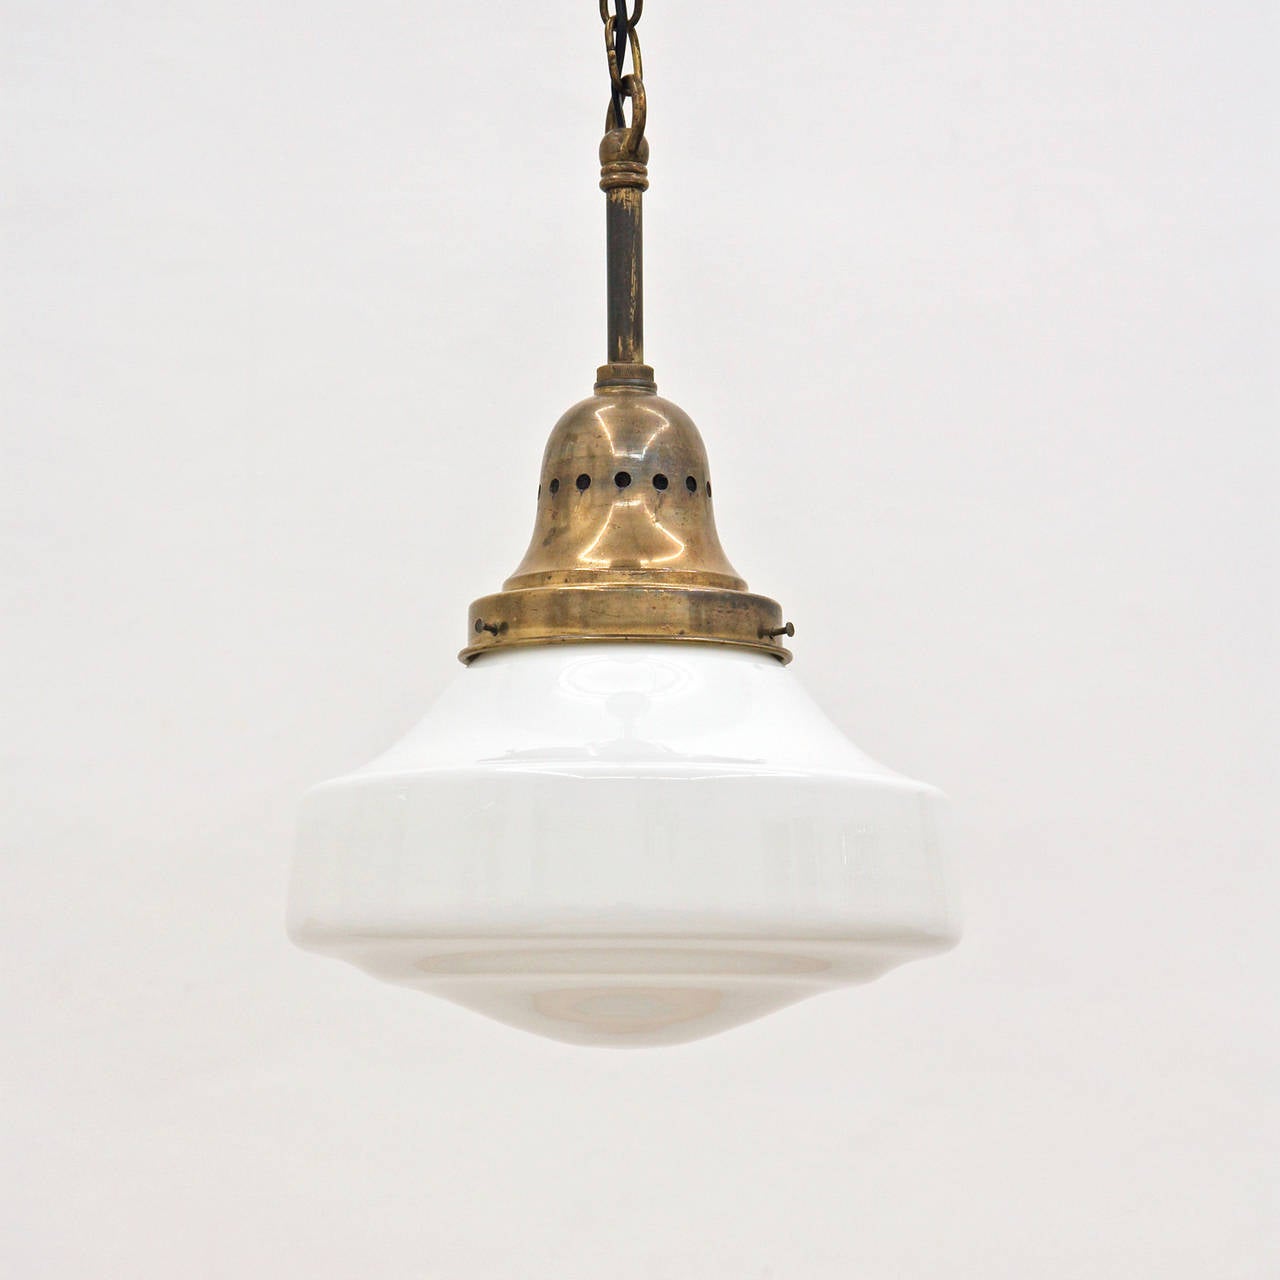 Rare and elegant Austrian Jugendstil pendant with opaline glass and brass hardware. Very good condition with age related patina to the brass. The original light socket takes one E27 bulb. We can provide any length of chain to fit your needs at no